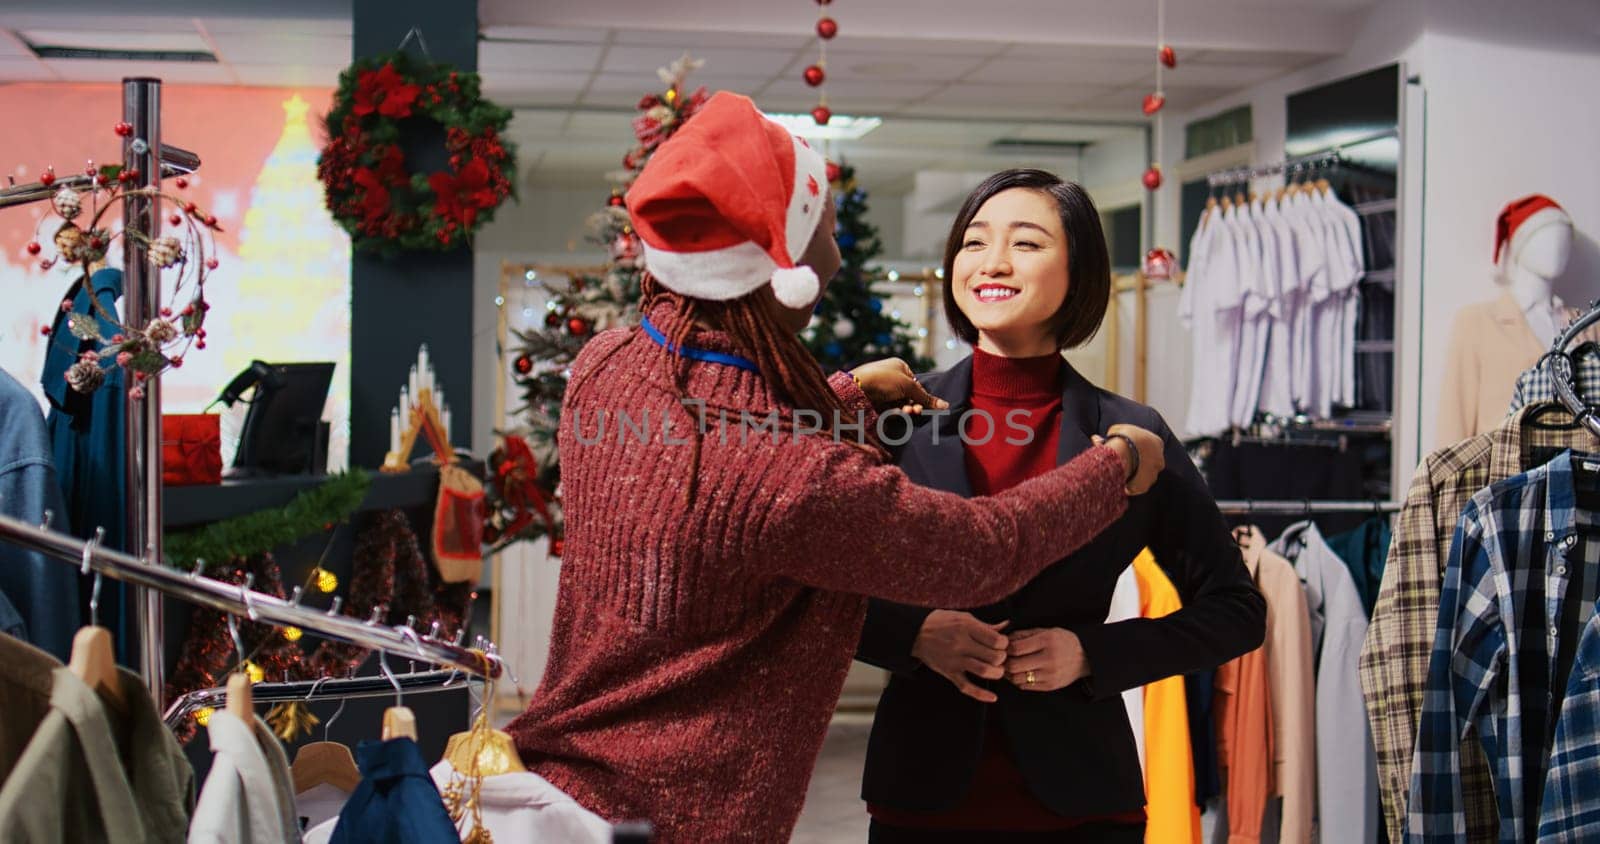 Asian client getting out of changing room, excited about elegant blazer fitting perfectly, speaking with helpful retail assistant in Christmas themed clothing store during winter holiday season